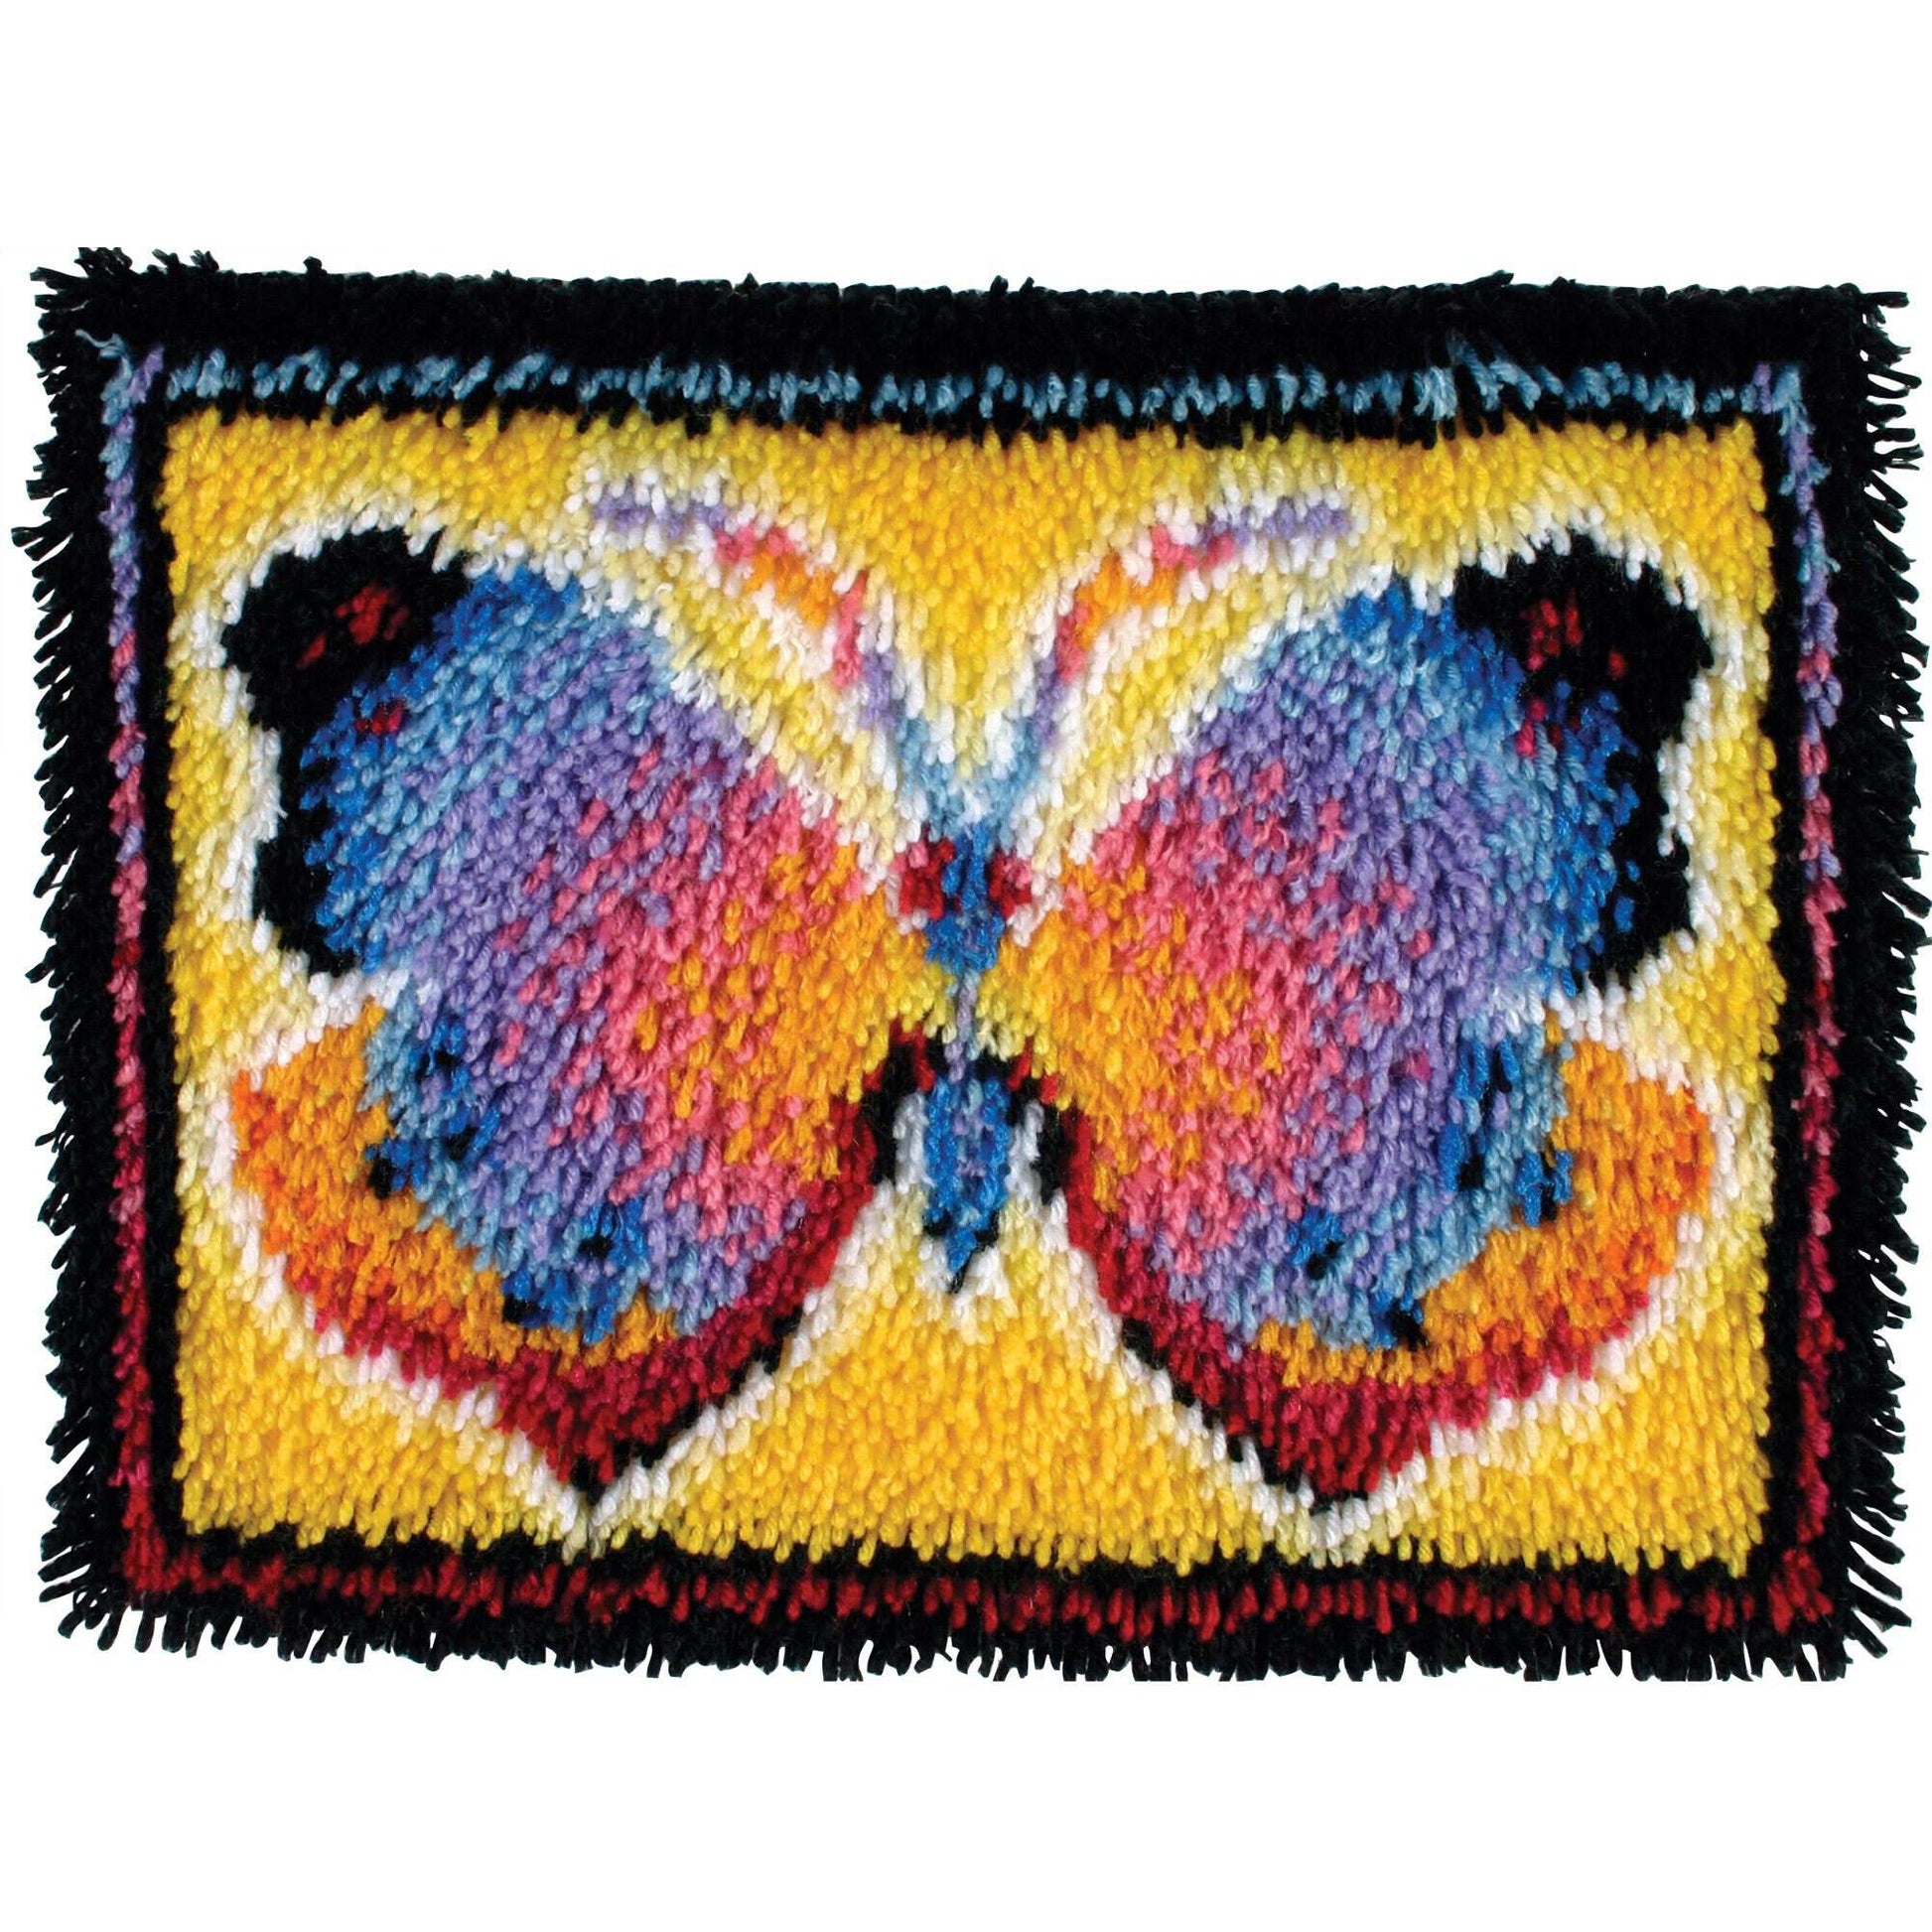 WonderArt Butterfly Fantasy Kit 15" x 20", Discontinued items Butterfly Fantasy